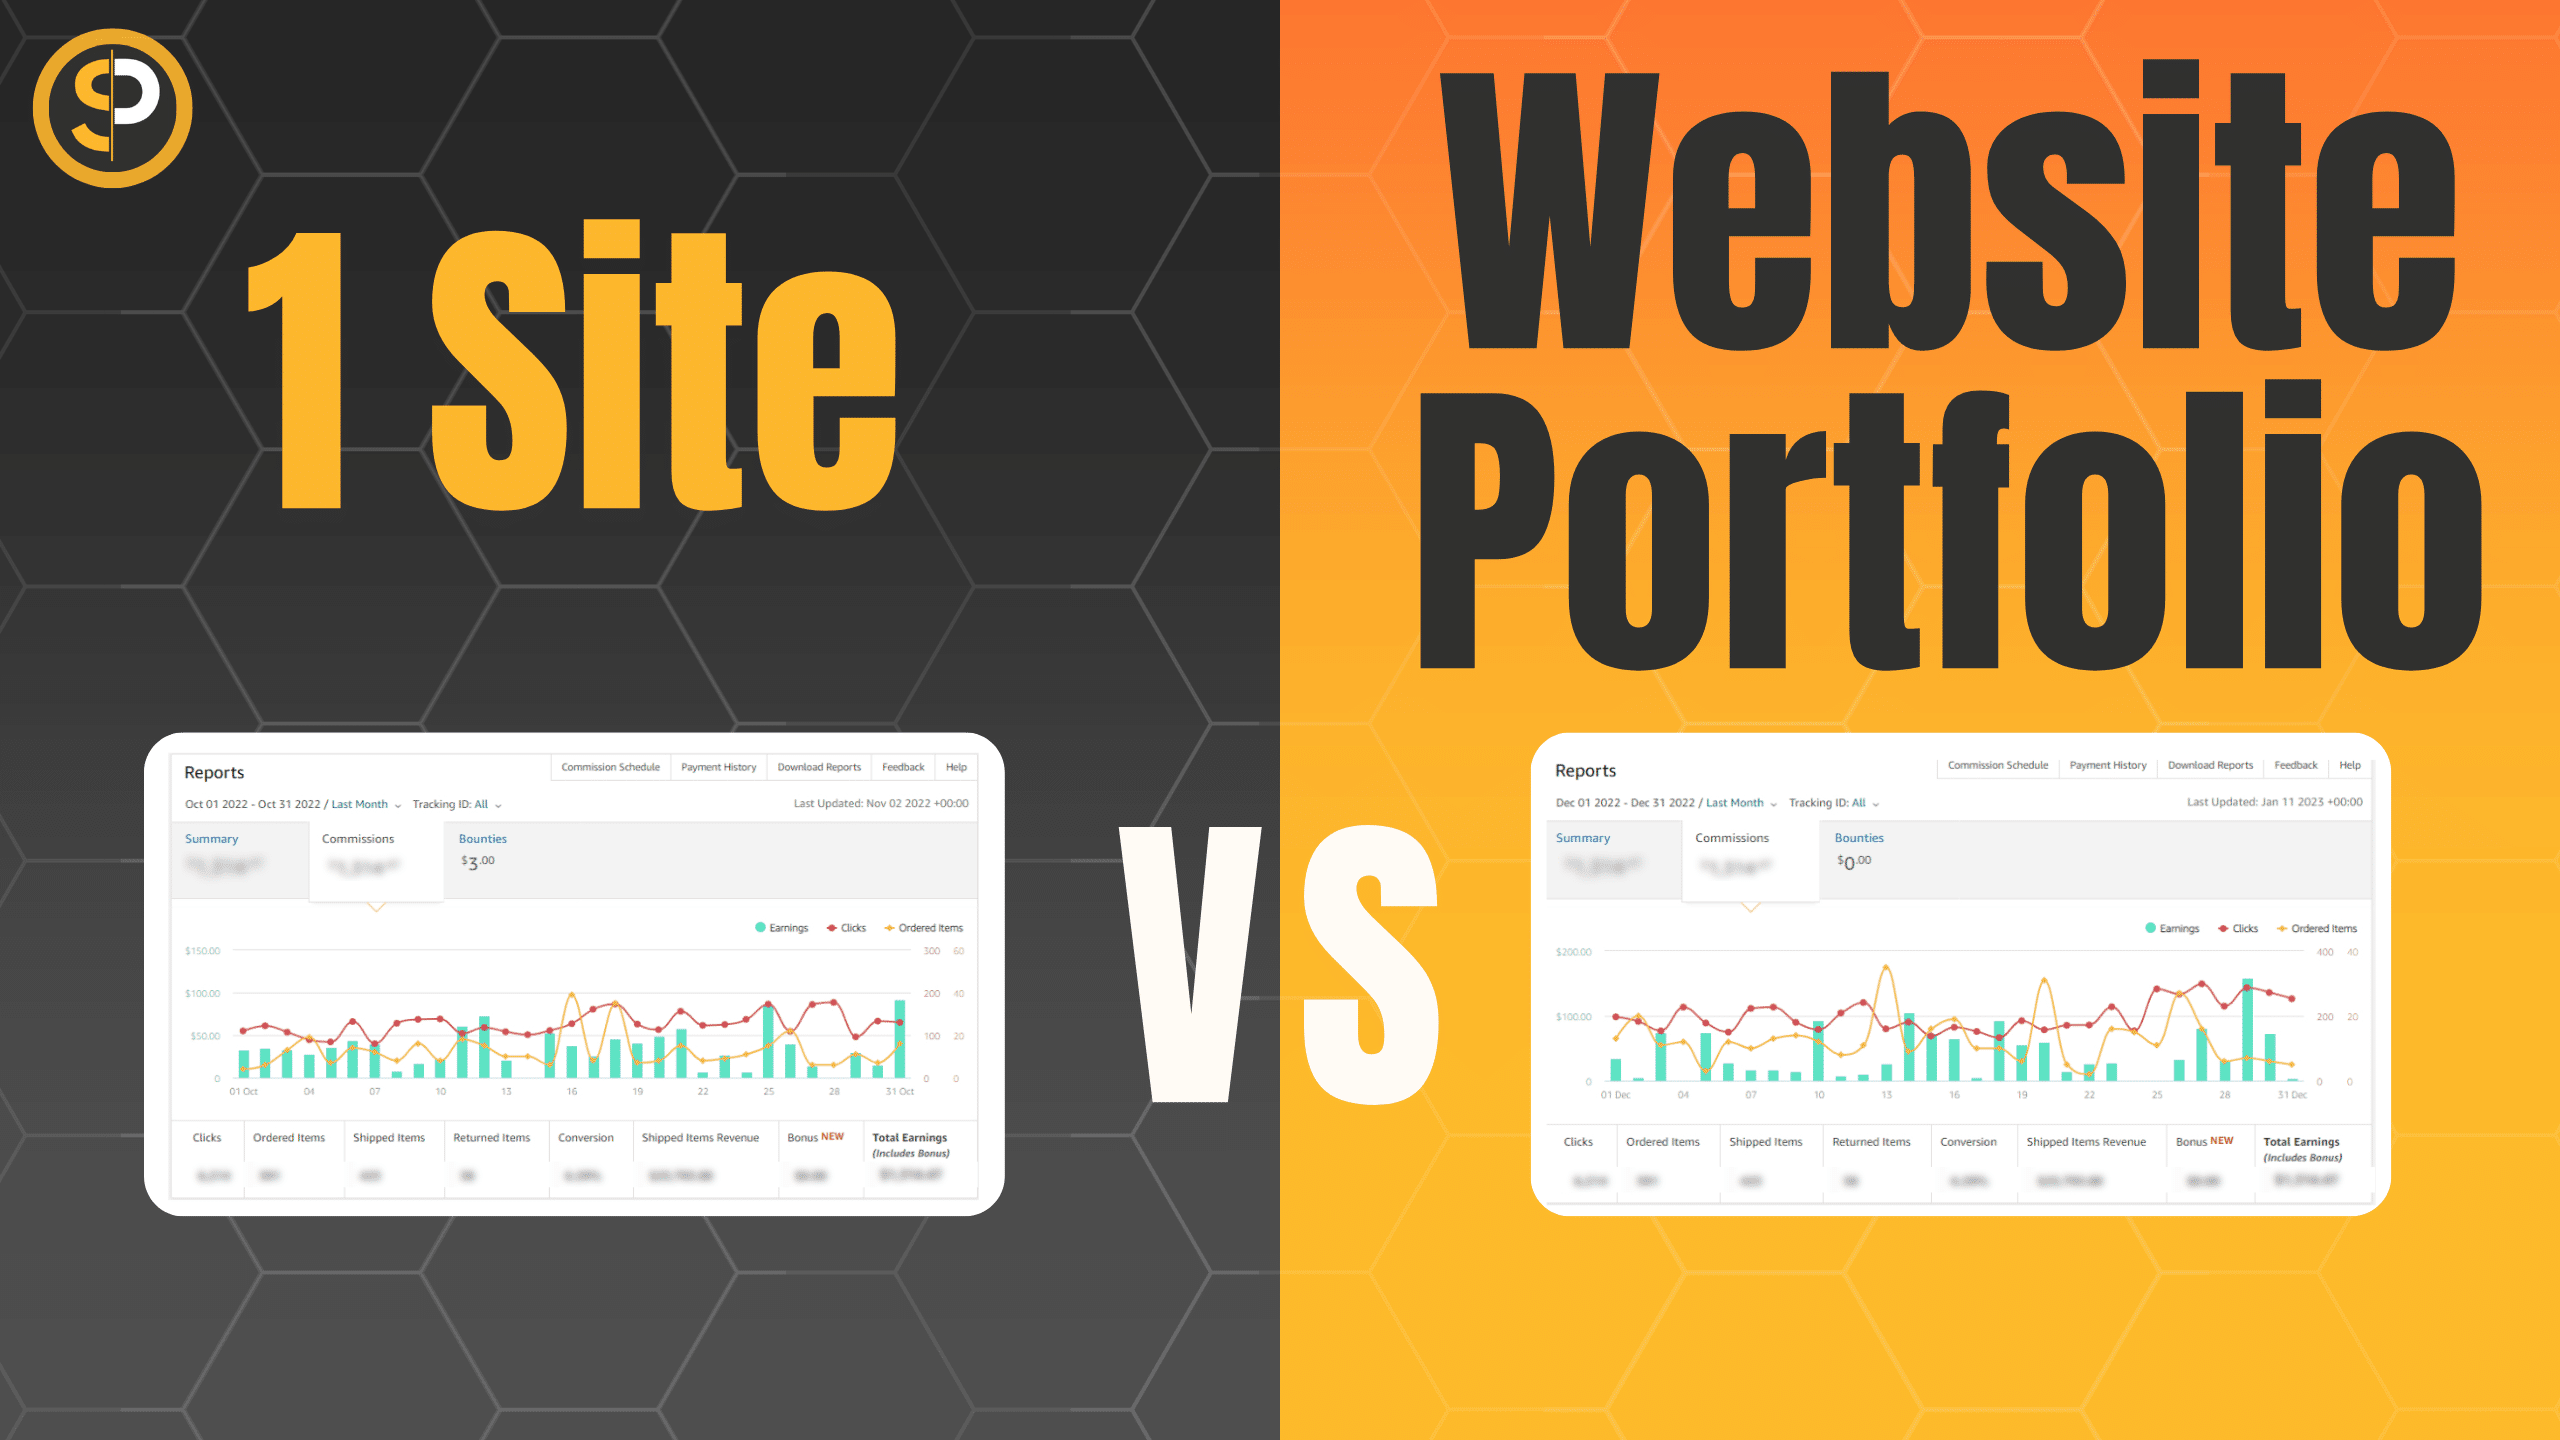 Featured image showing 1 website vs multiple niche sites